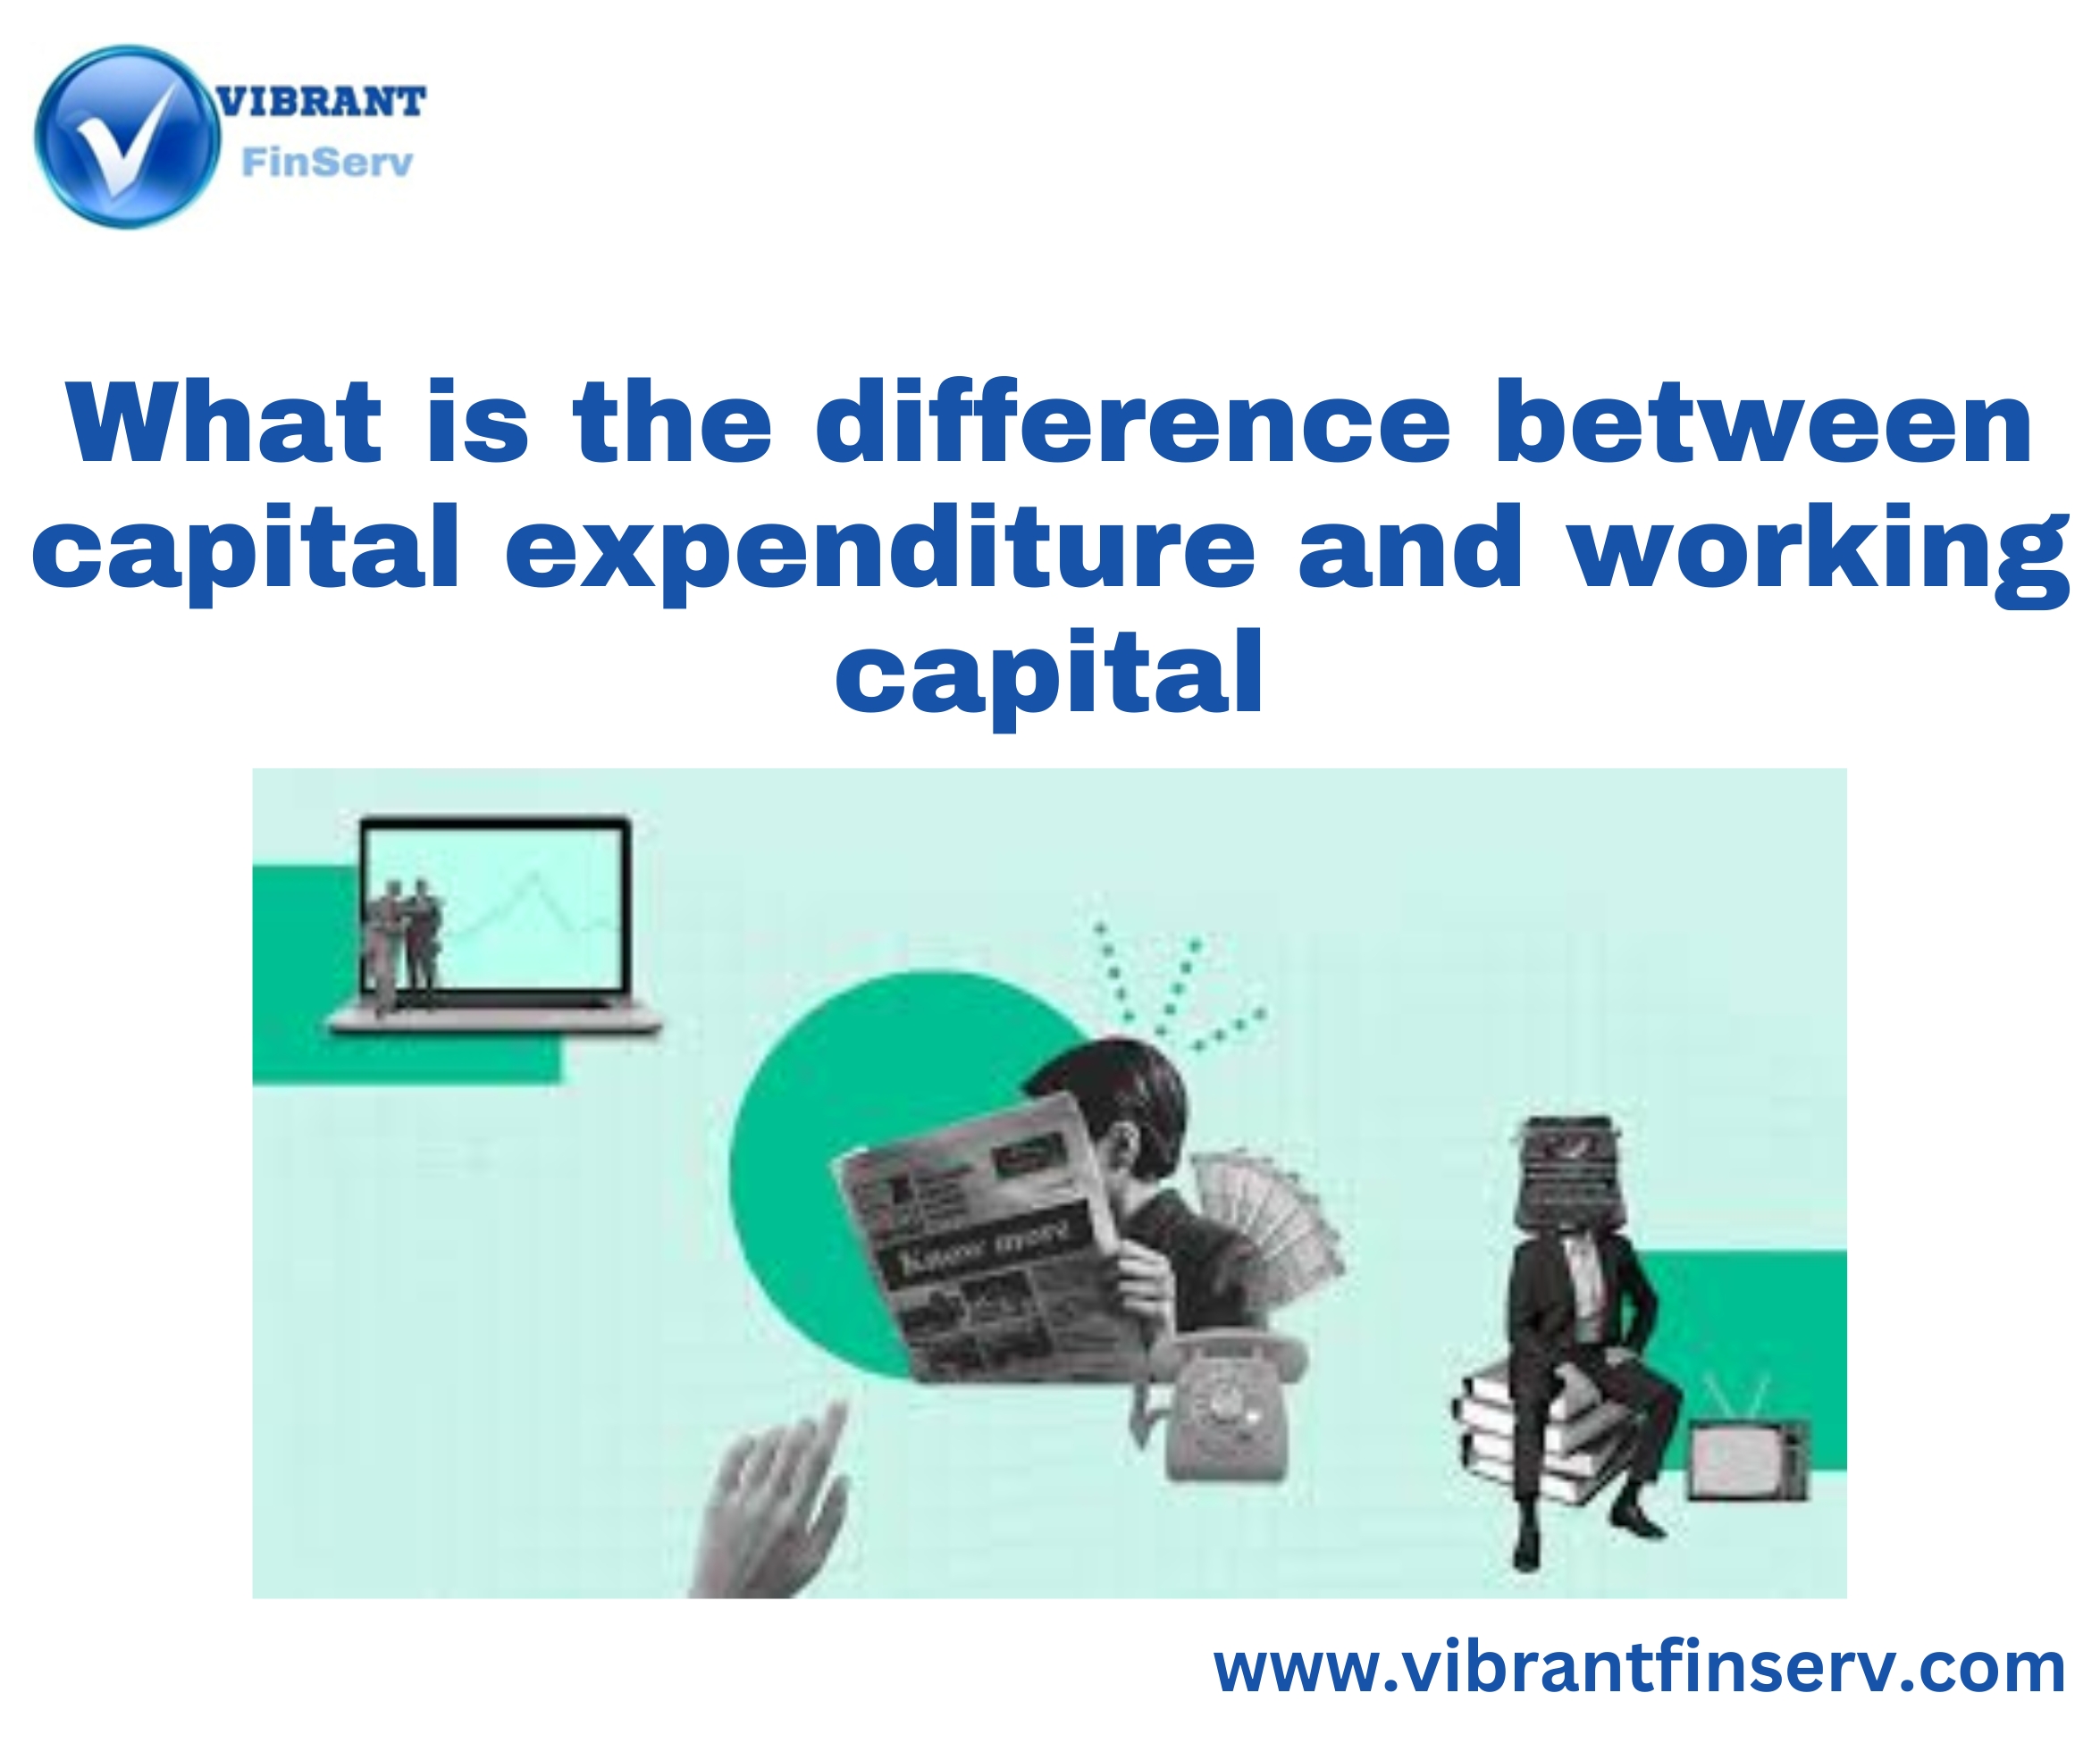 Capital Expenditure and Working Capital